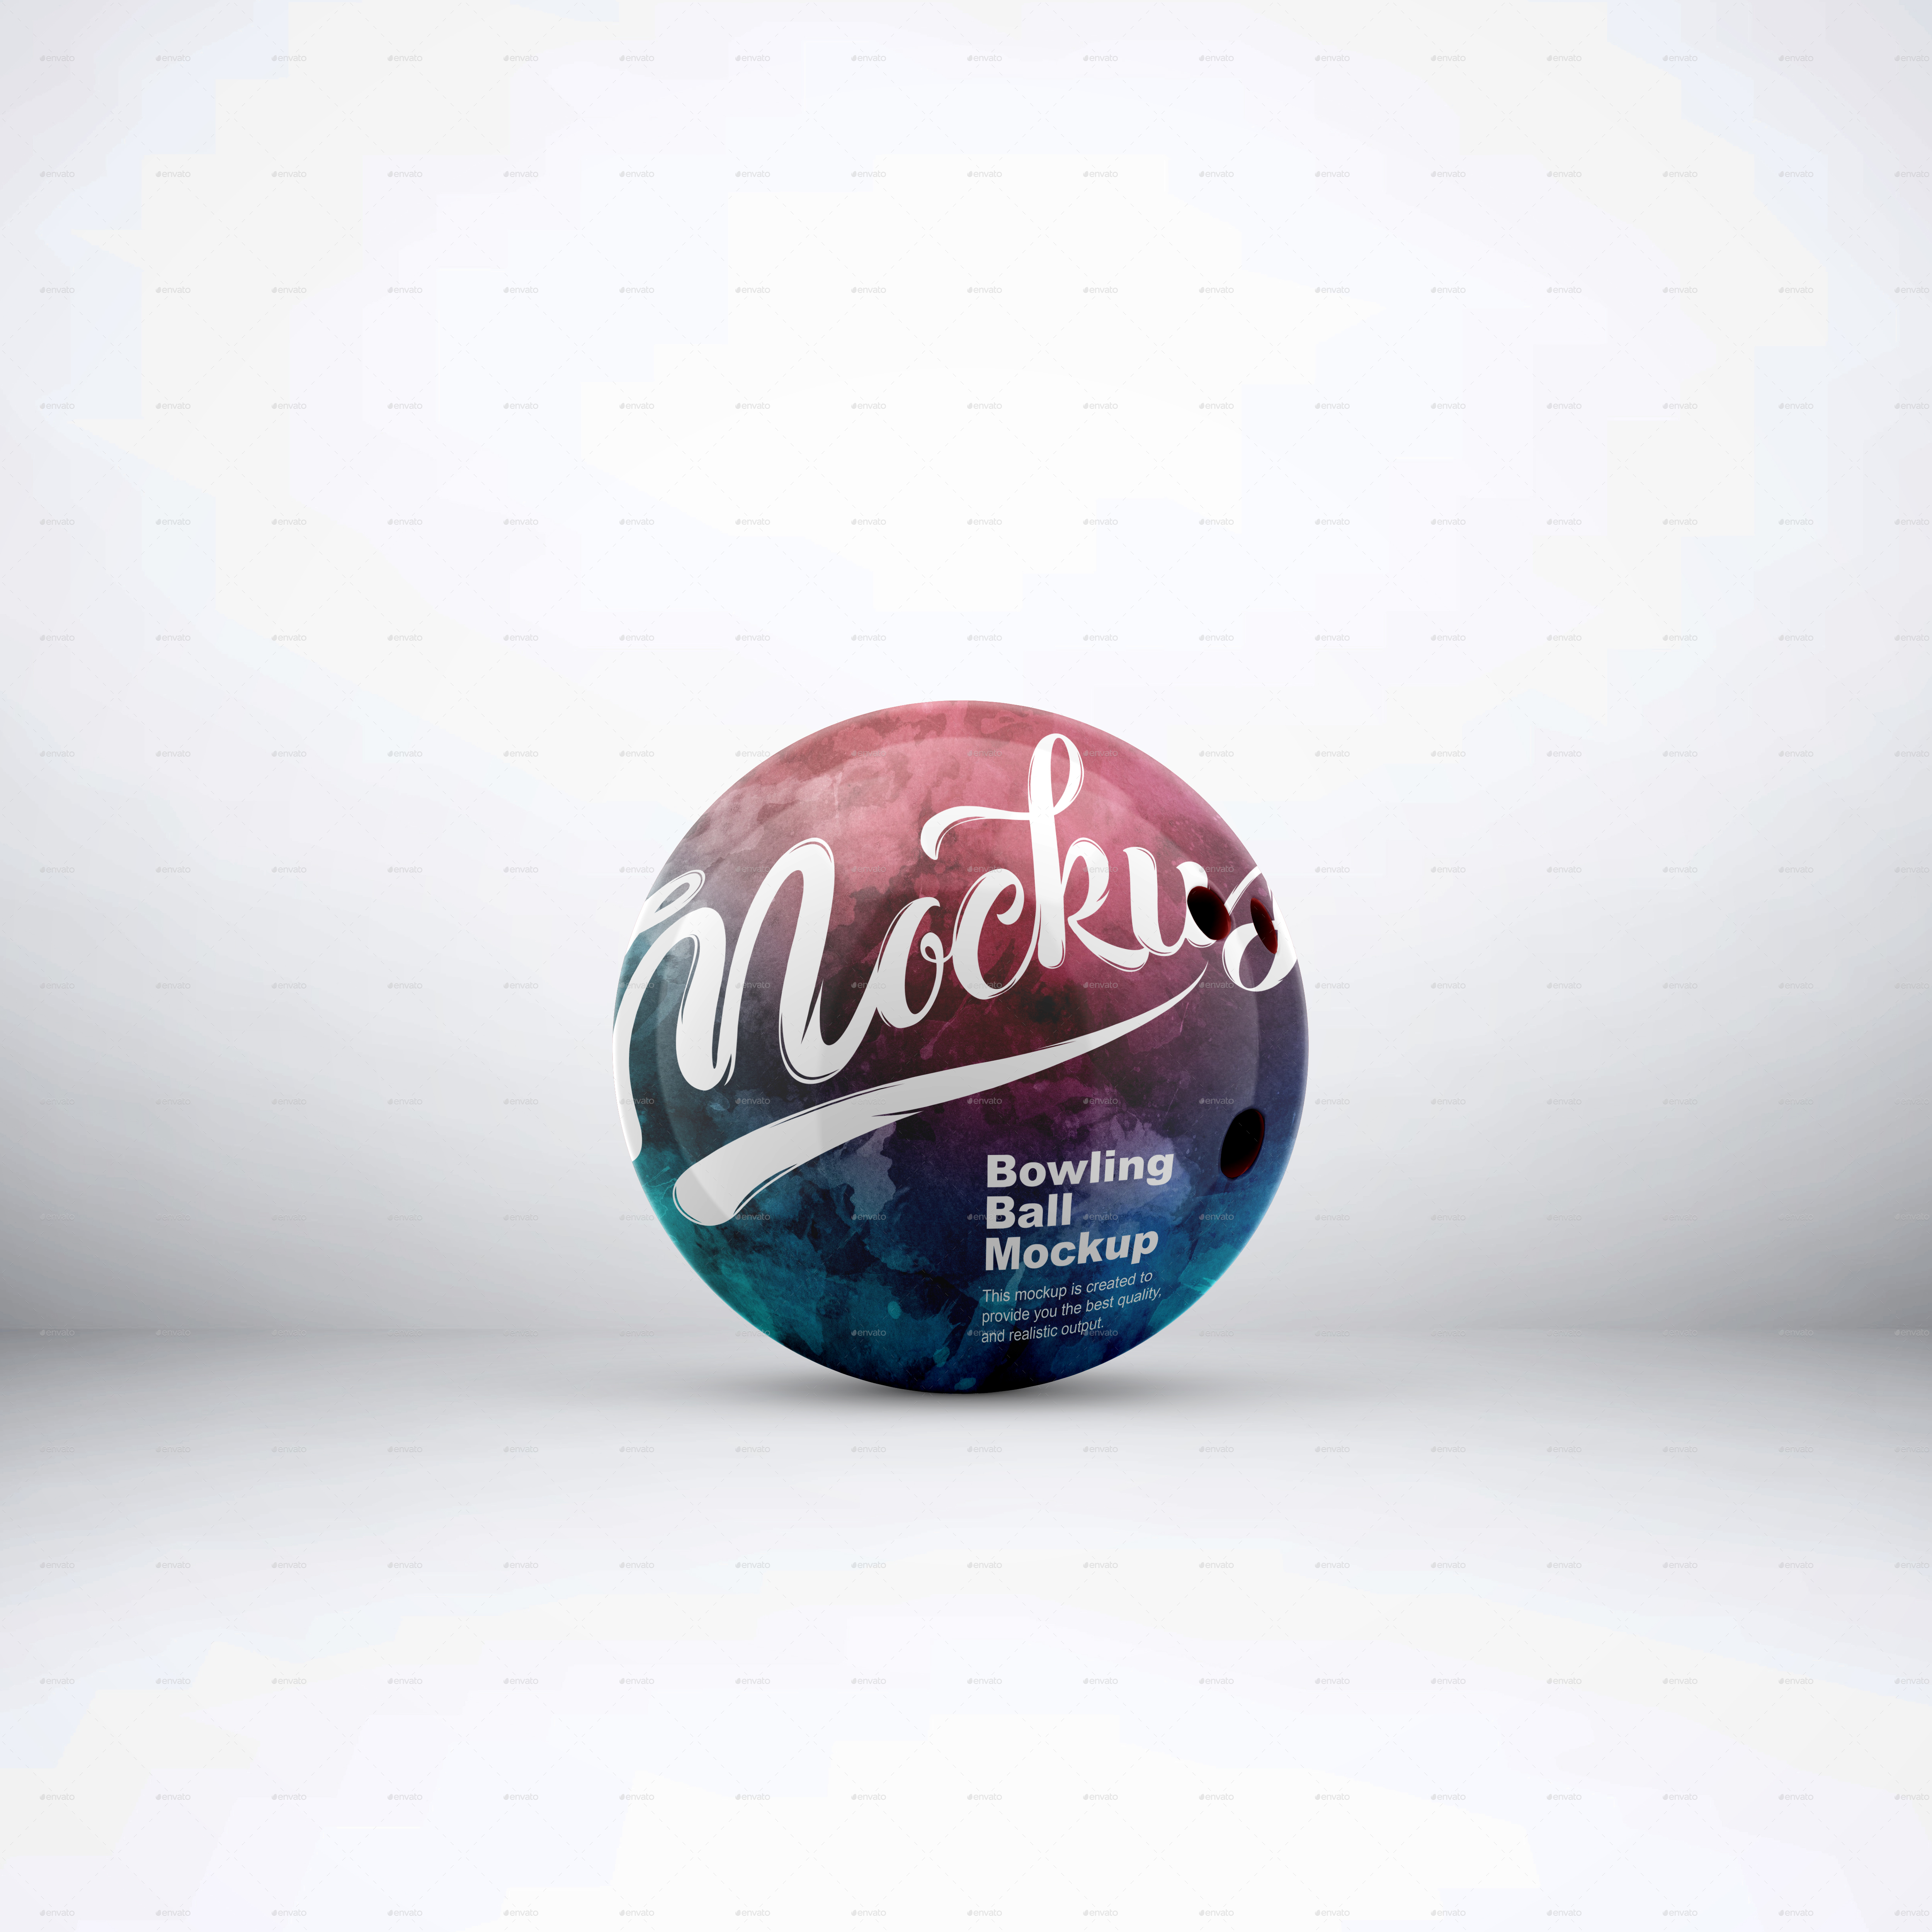 Download Bowling Ball Mockup by graphicdesigno | GraphicRiver